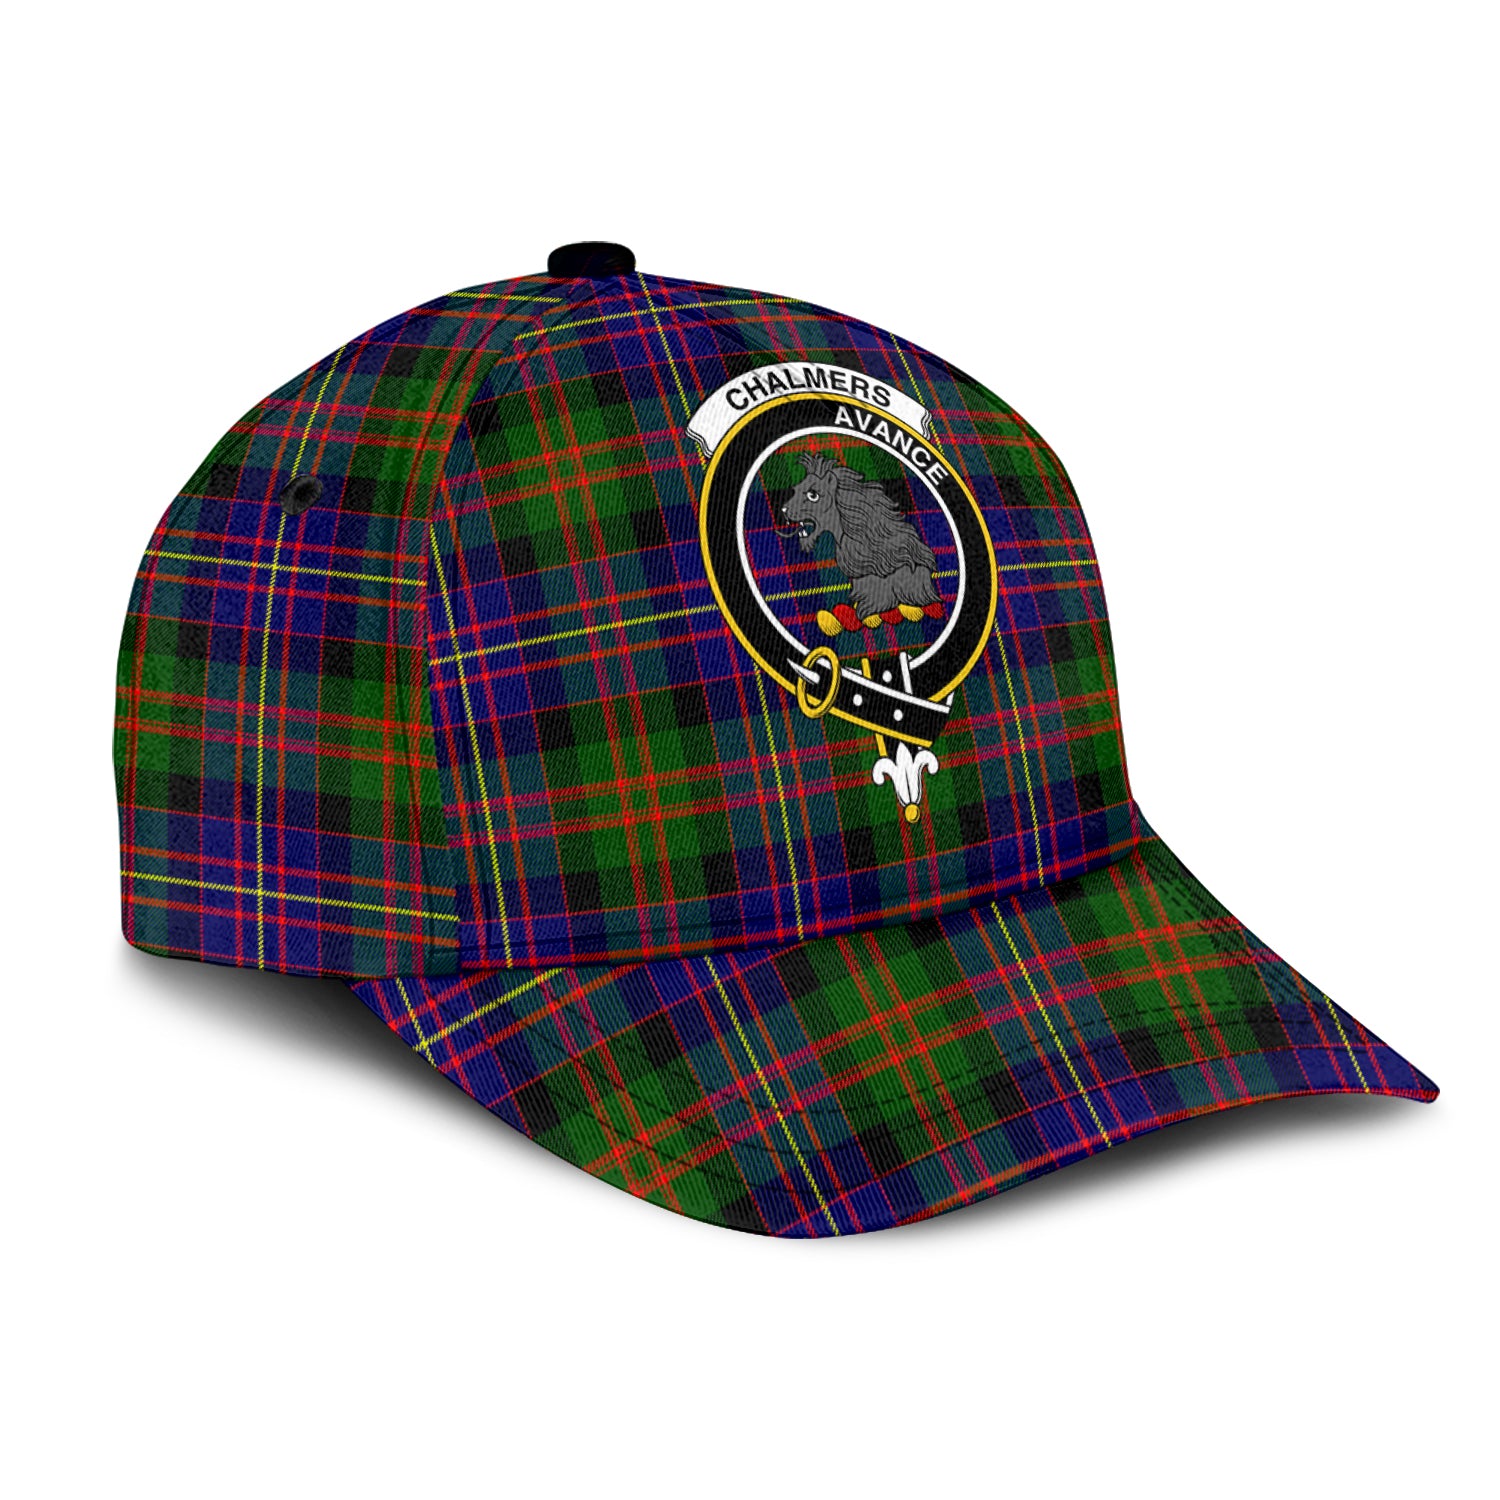 chalmers-modern-tartan-classic-cap-with-family-crest